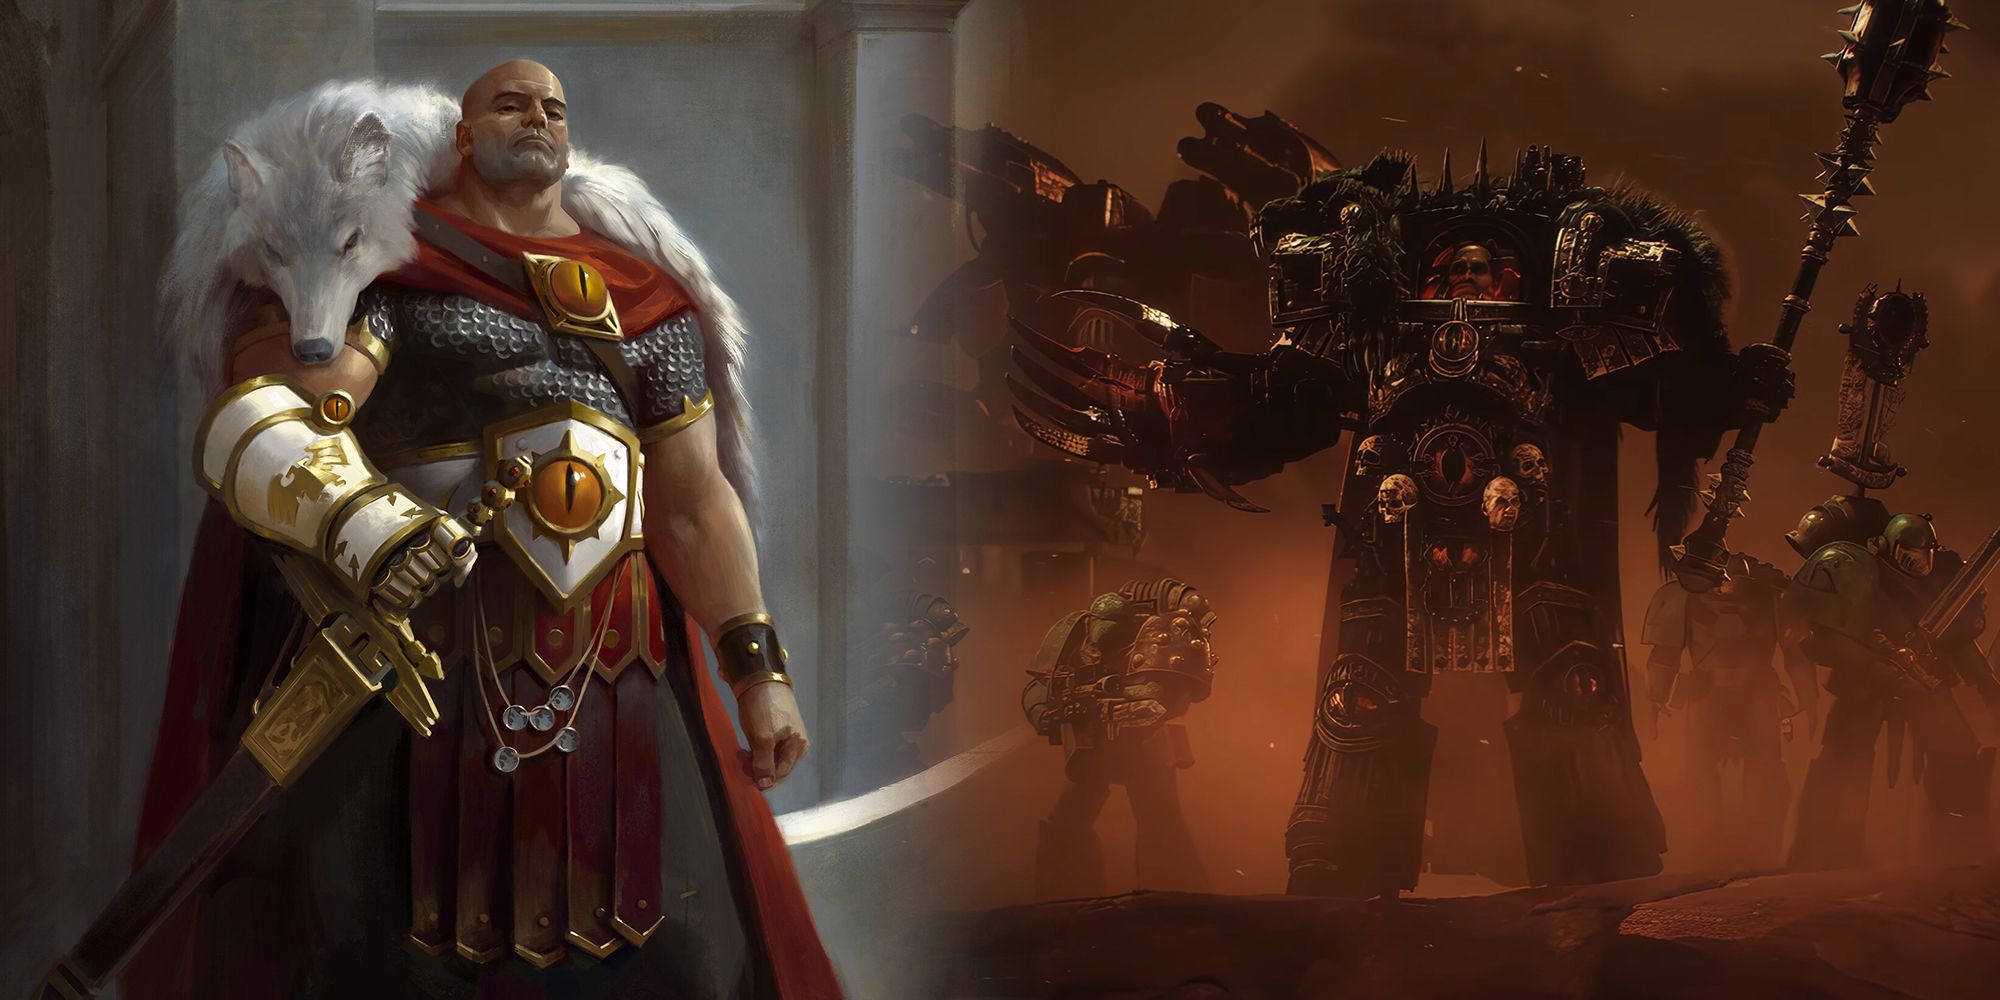 Warhammer 40k - Two Images SHowing Horus Before Corruption Of Chaos And After